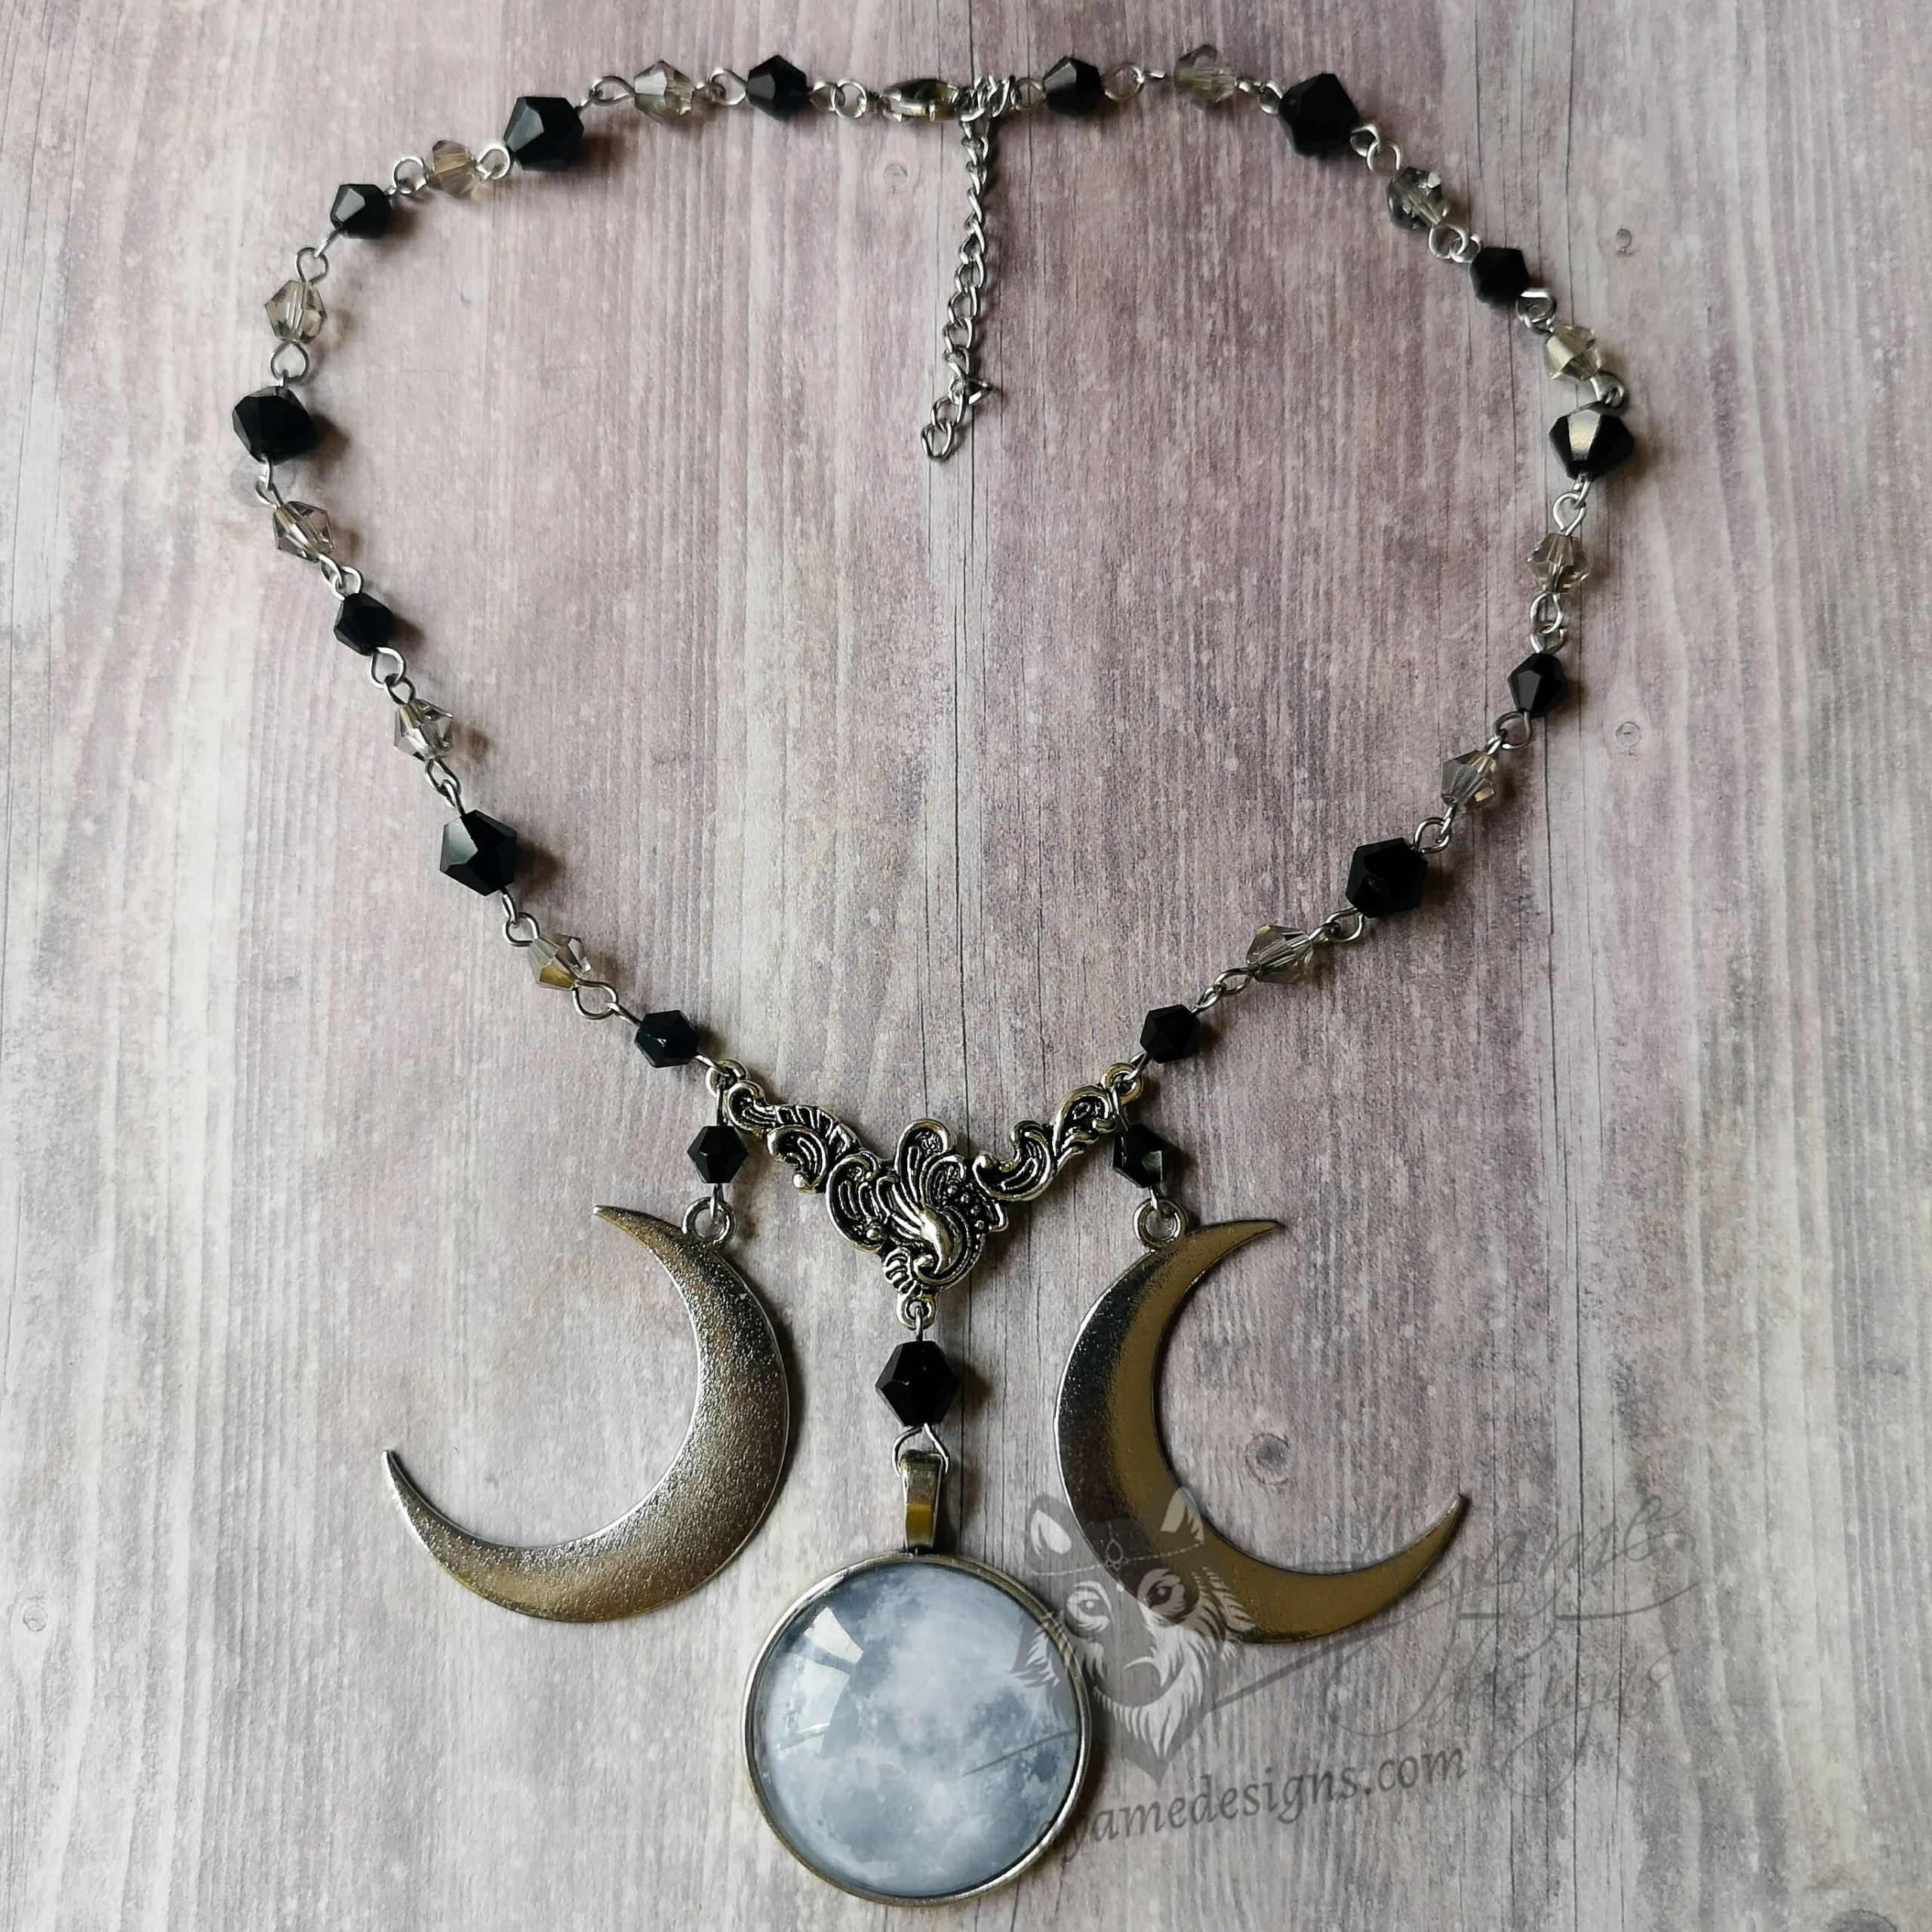 Gothic beaded choker necklace with grey and black Austrian crystal beads, a glass moon cabochon pendant, and a crescent moon pendant on each side